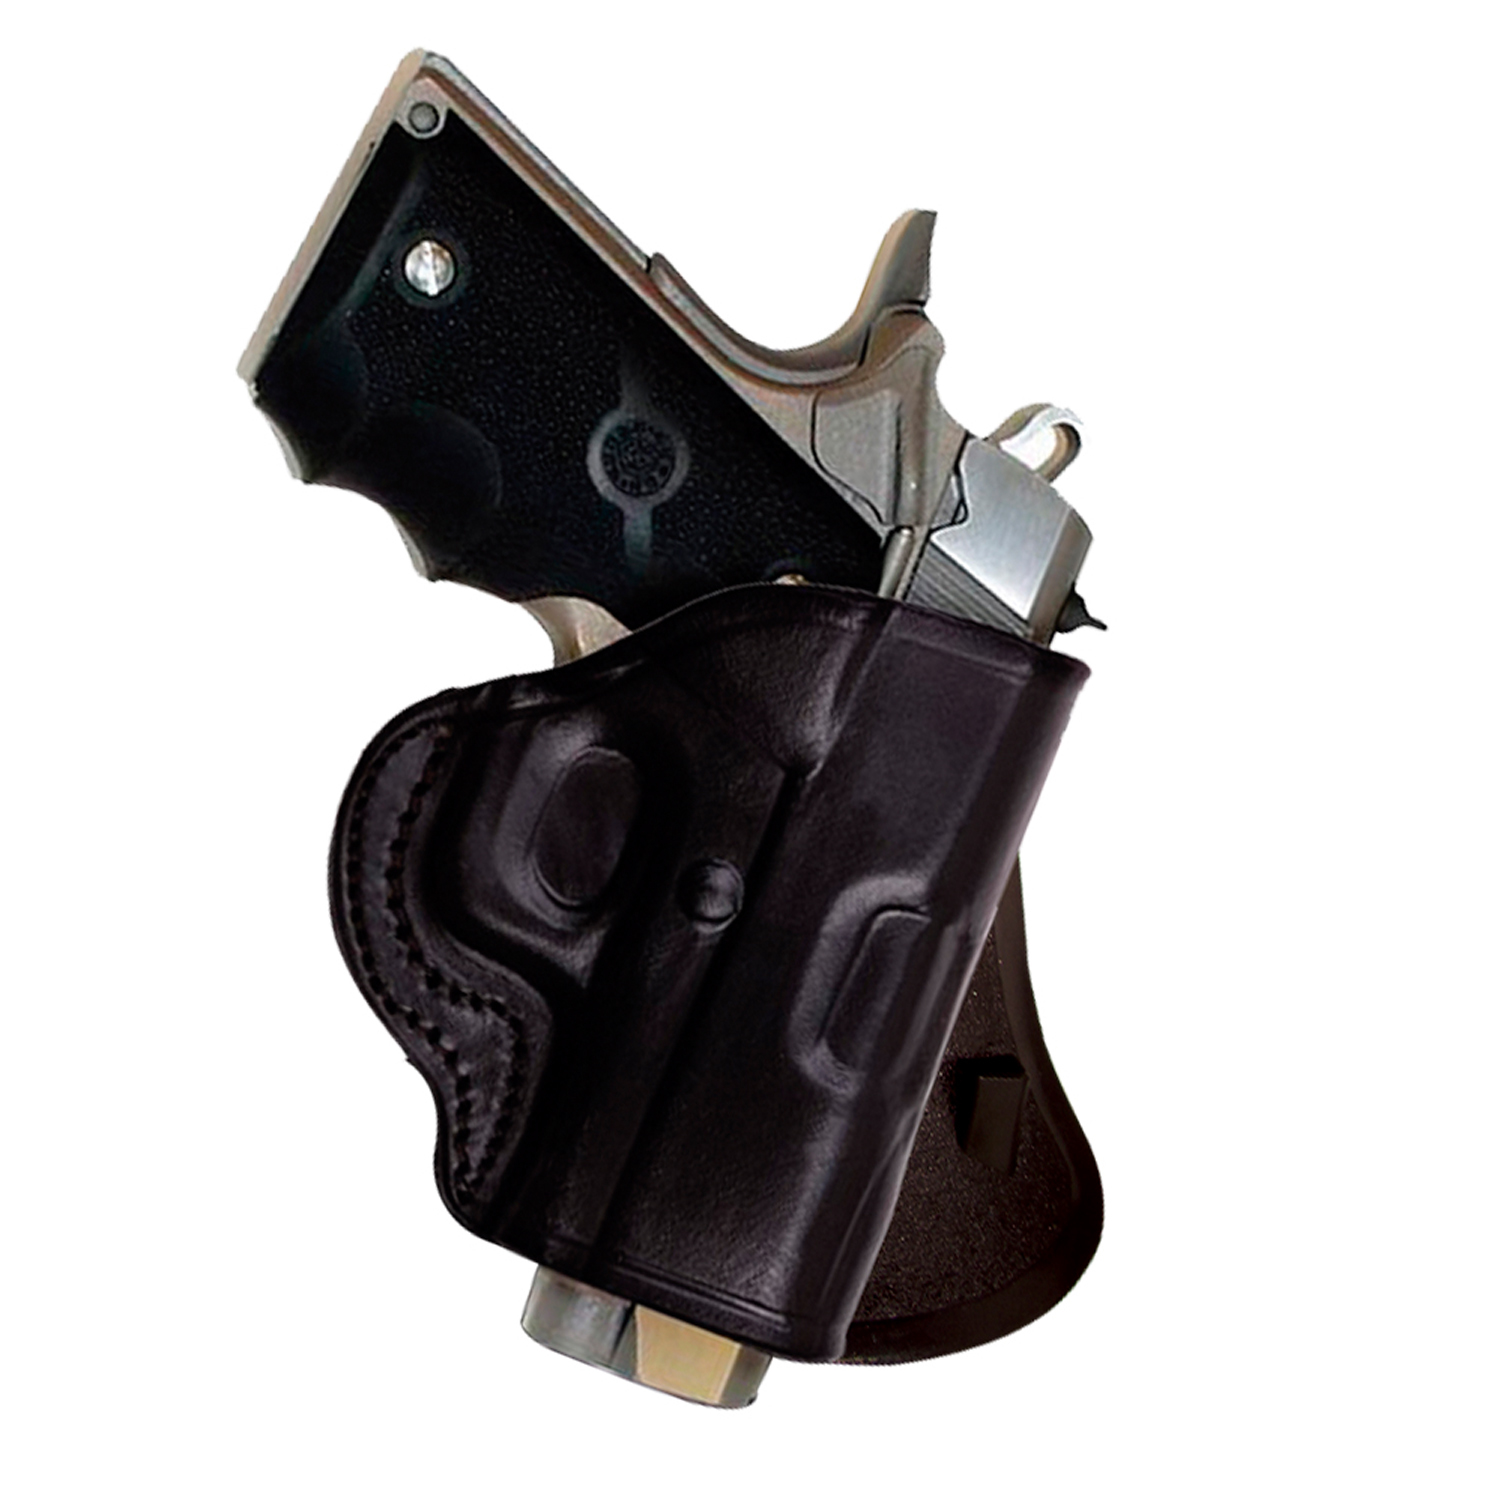 quickdraw holster